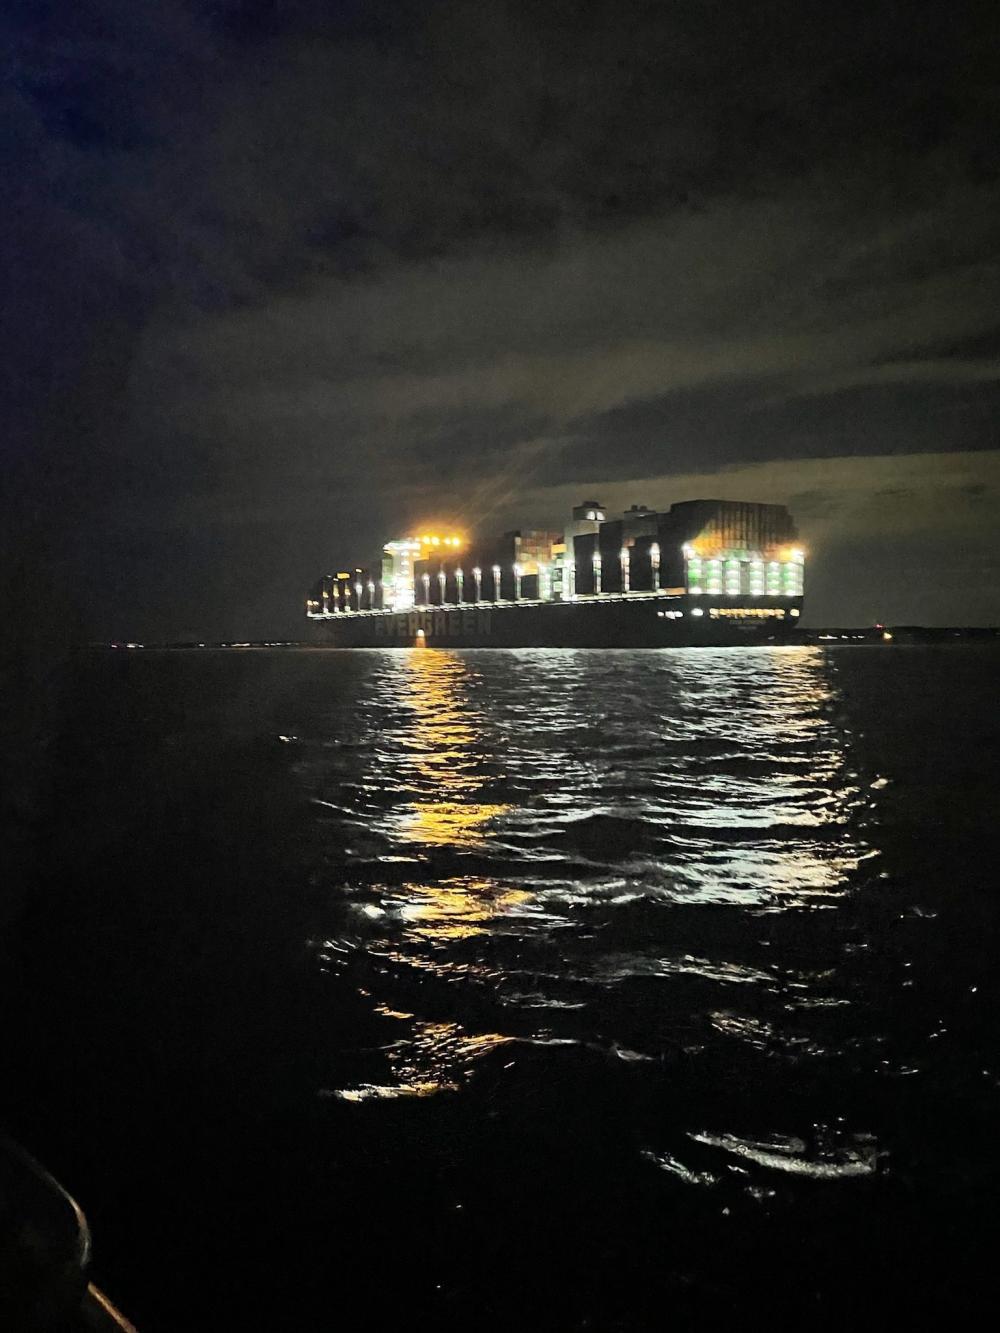 The 1,095 foot cargo vessel, Ever Forward, sits grounded in the Chesapeake Bay, near the Craigshill Channel, March 13, 2022. The Coast Guard is currently assessing the situation to determine the best and safest means of refloating the vessel. U.S. Coast Guard photo.